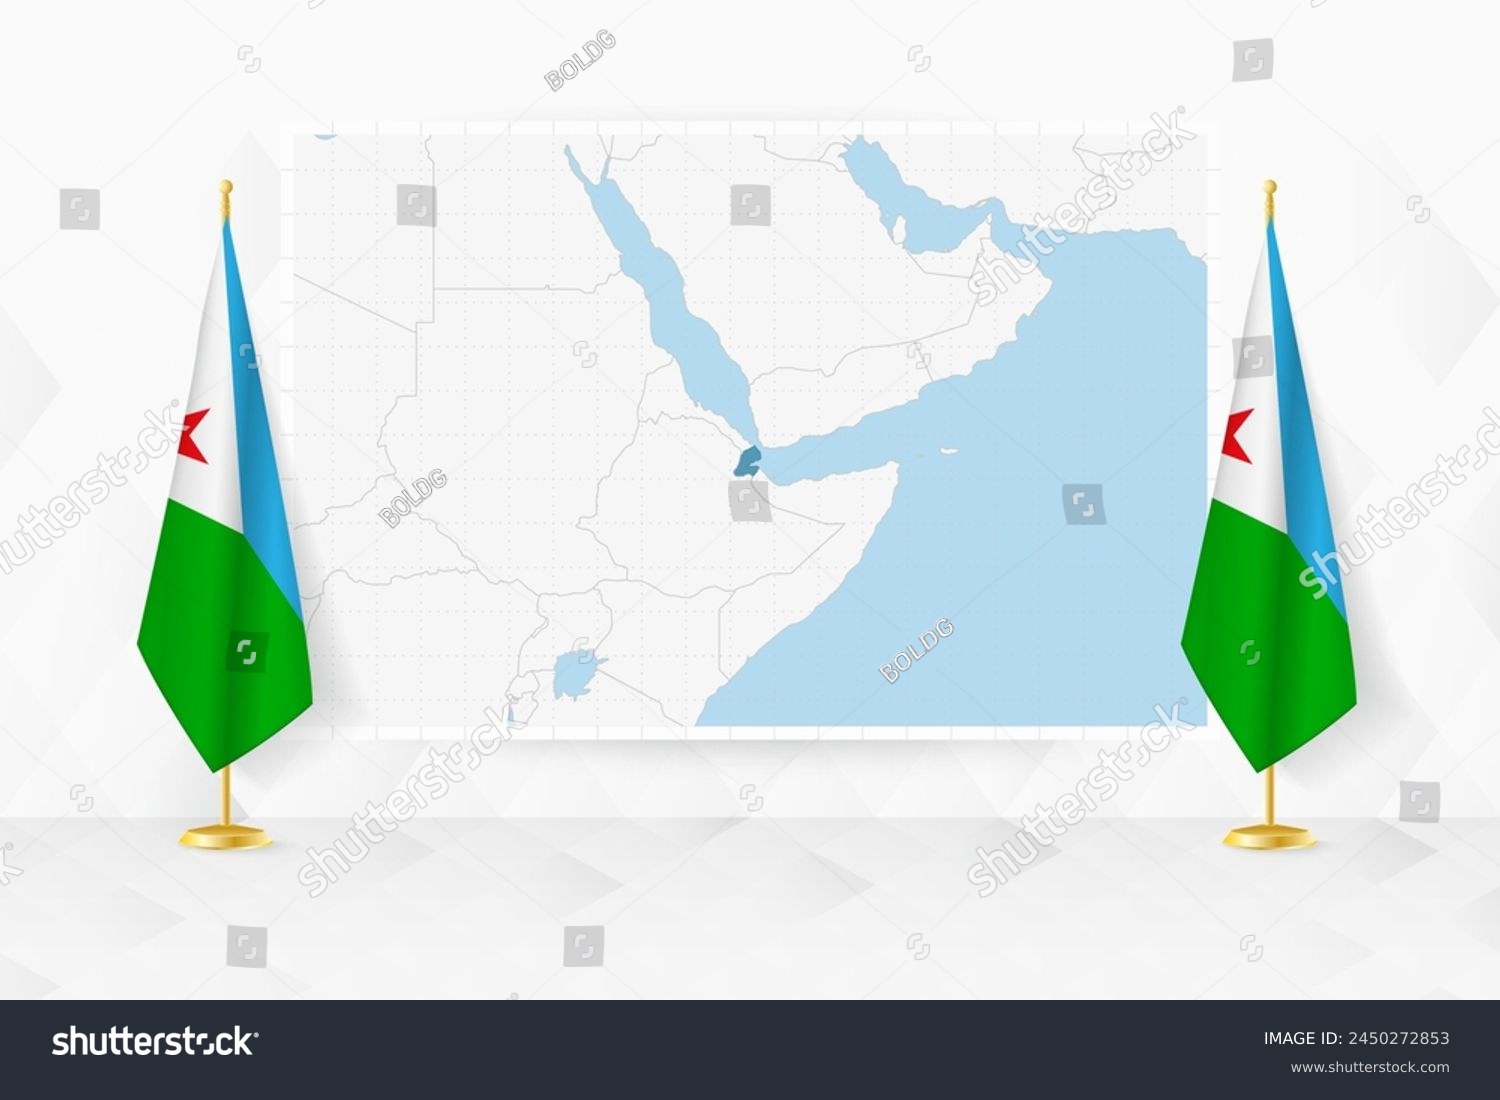 SVG of Map of Djibouti and flags of Djibouti on flag stand. Vector illustration for diplomacy meeting. svg